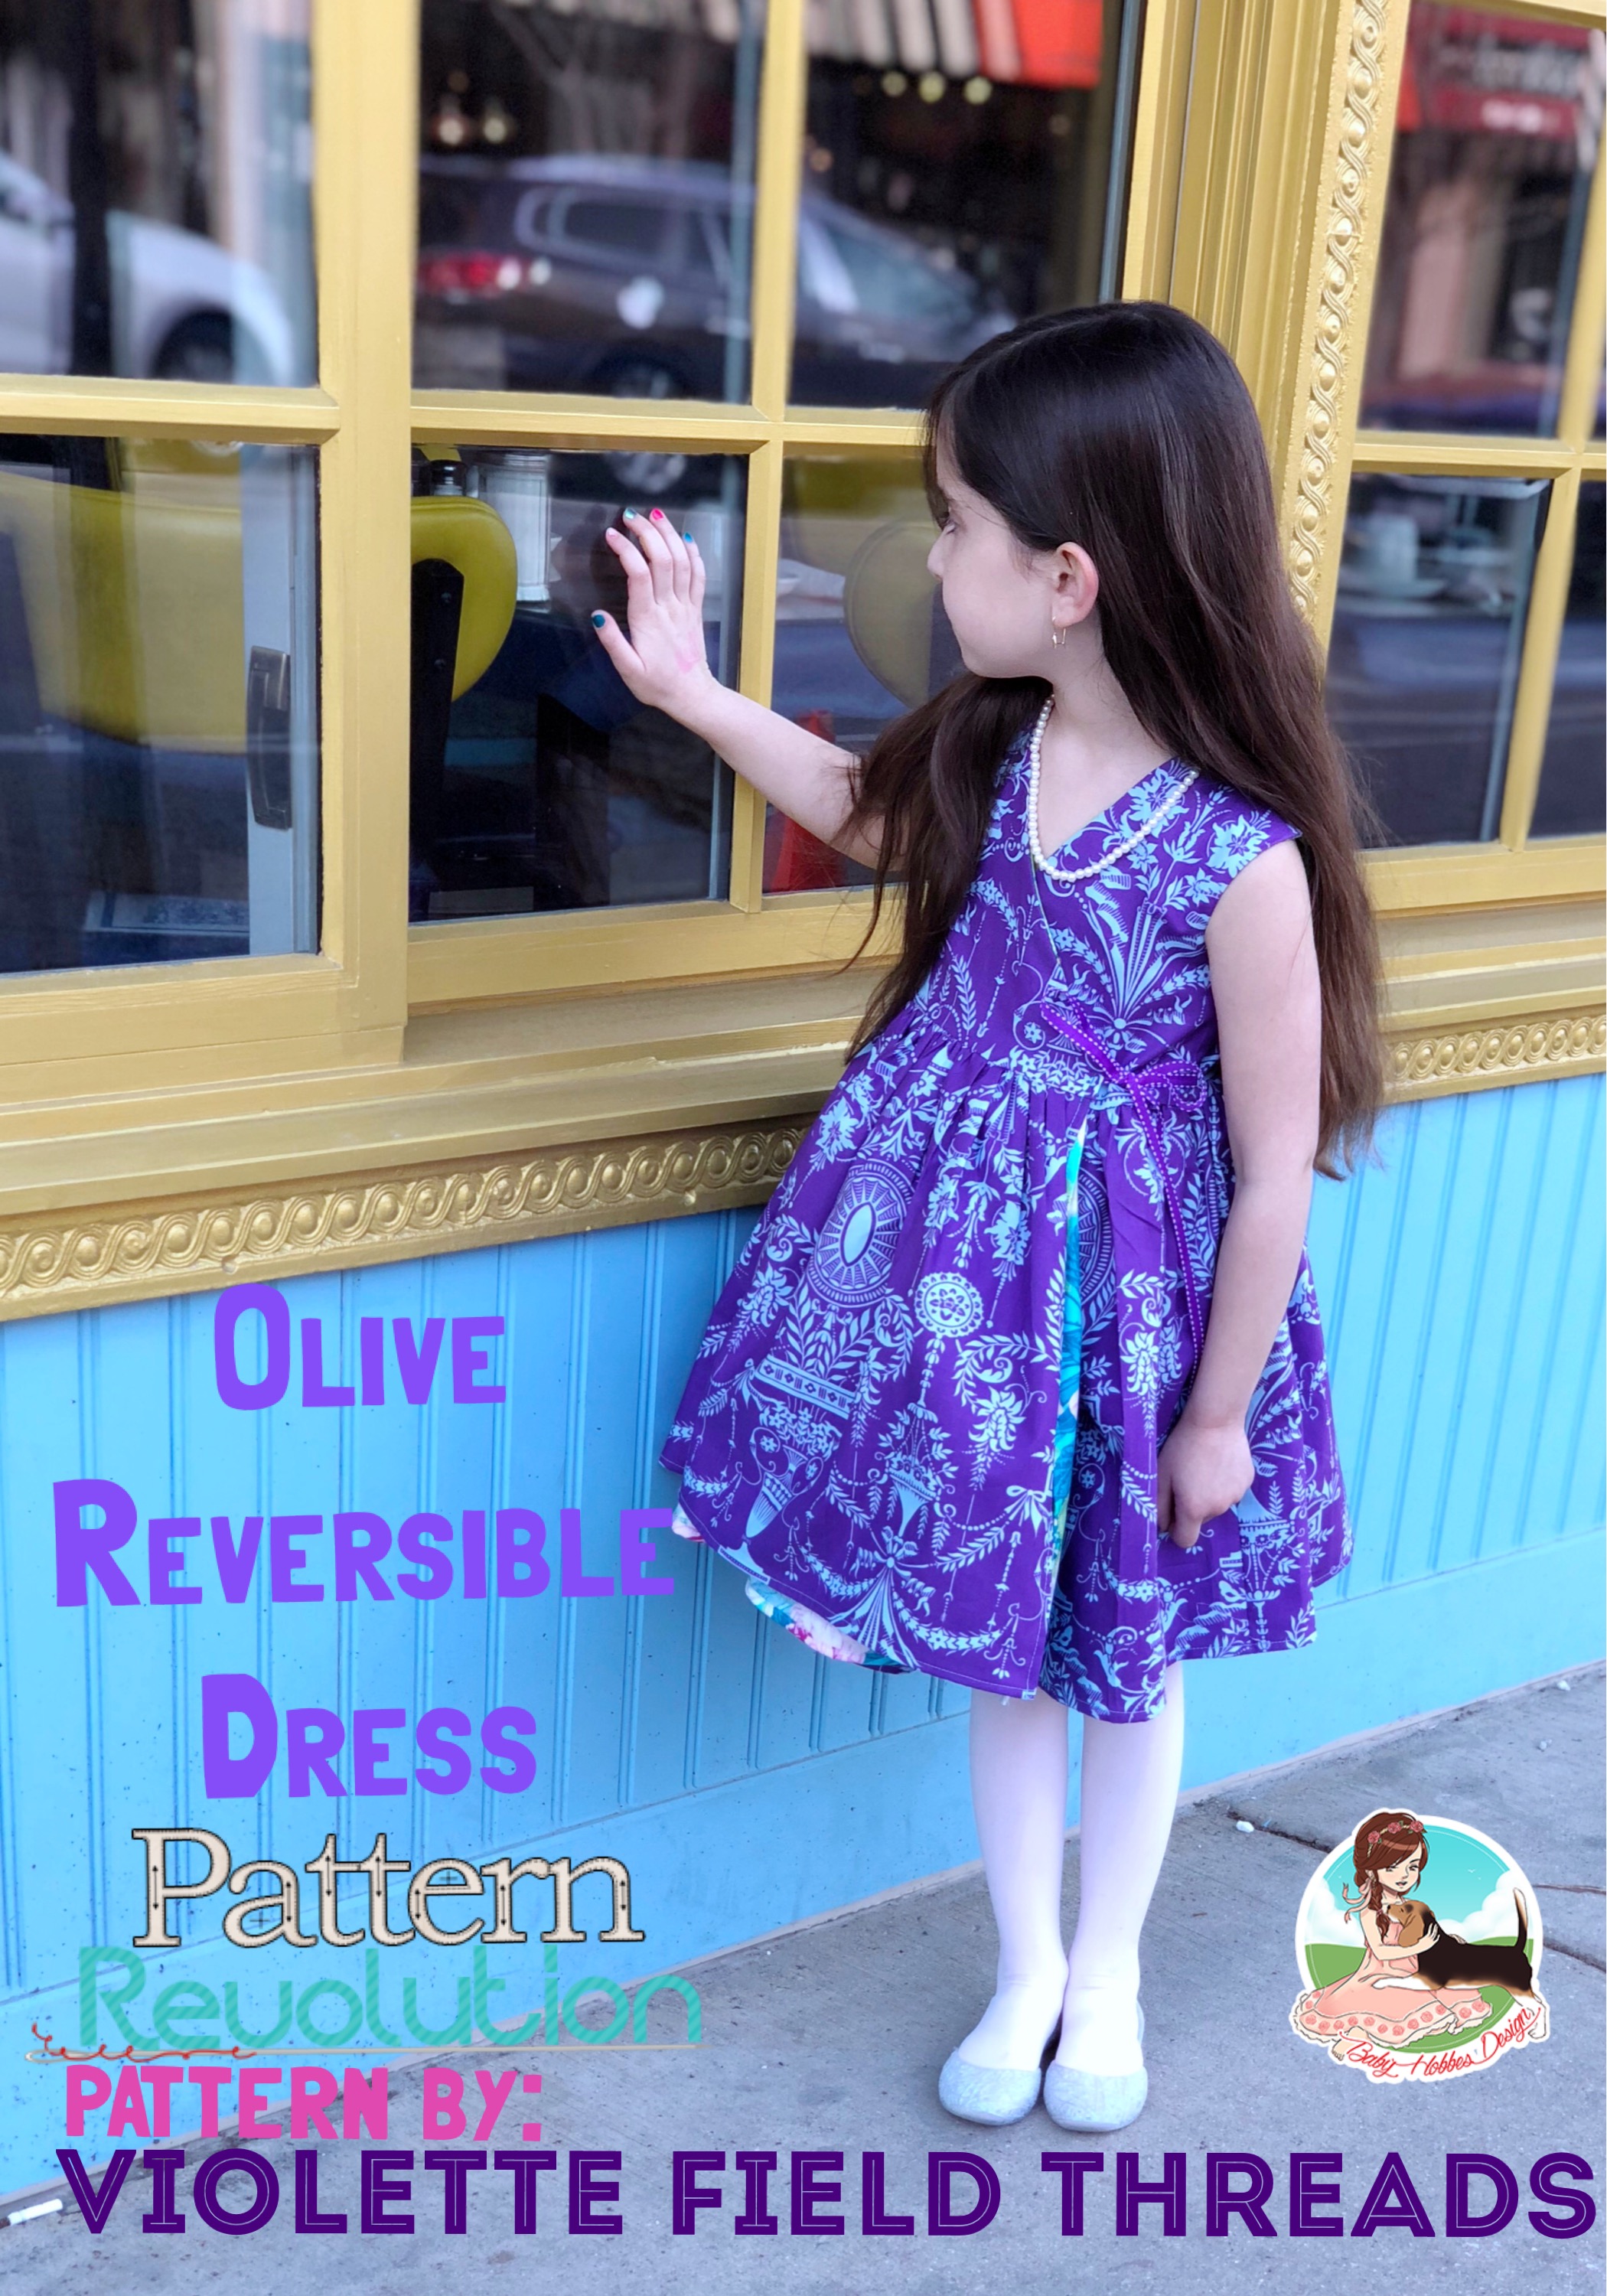 The Olive Reversible Wrap Dress and Top by Violette Field Threads